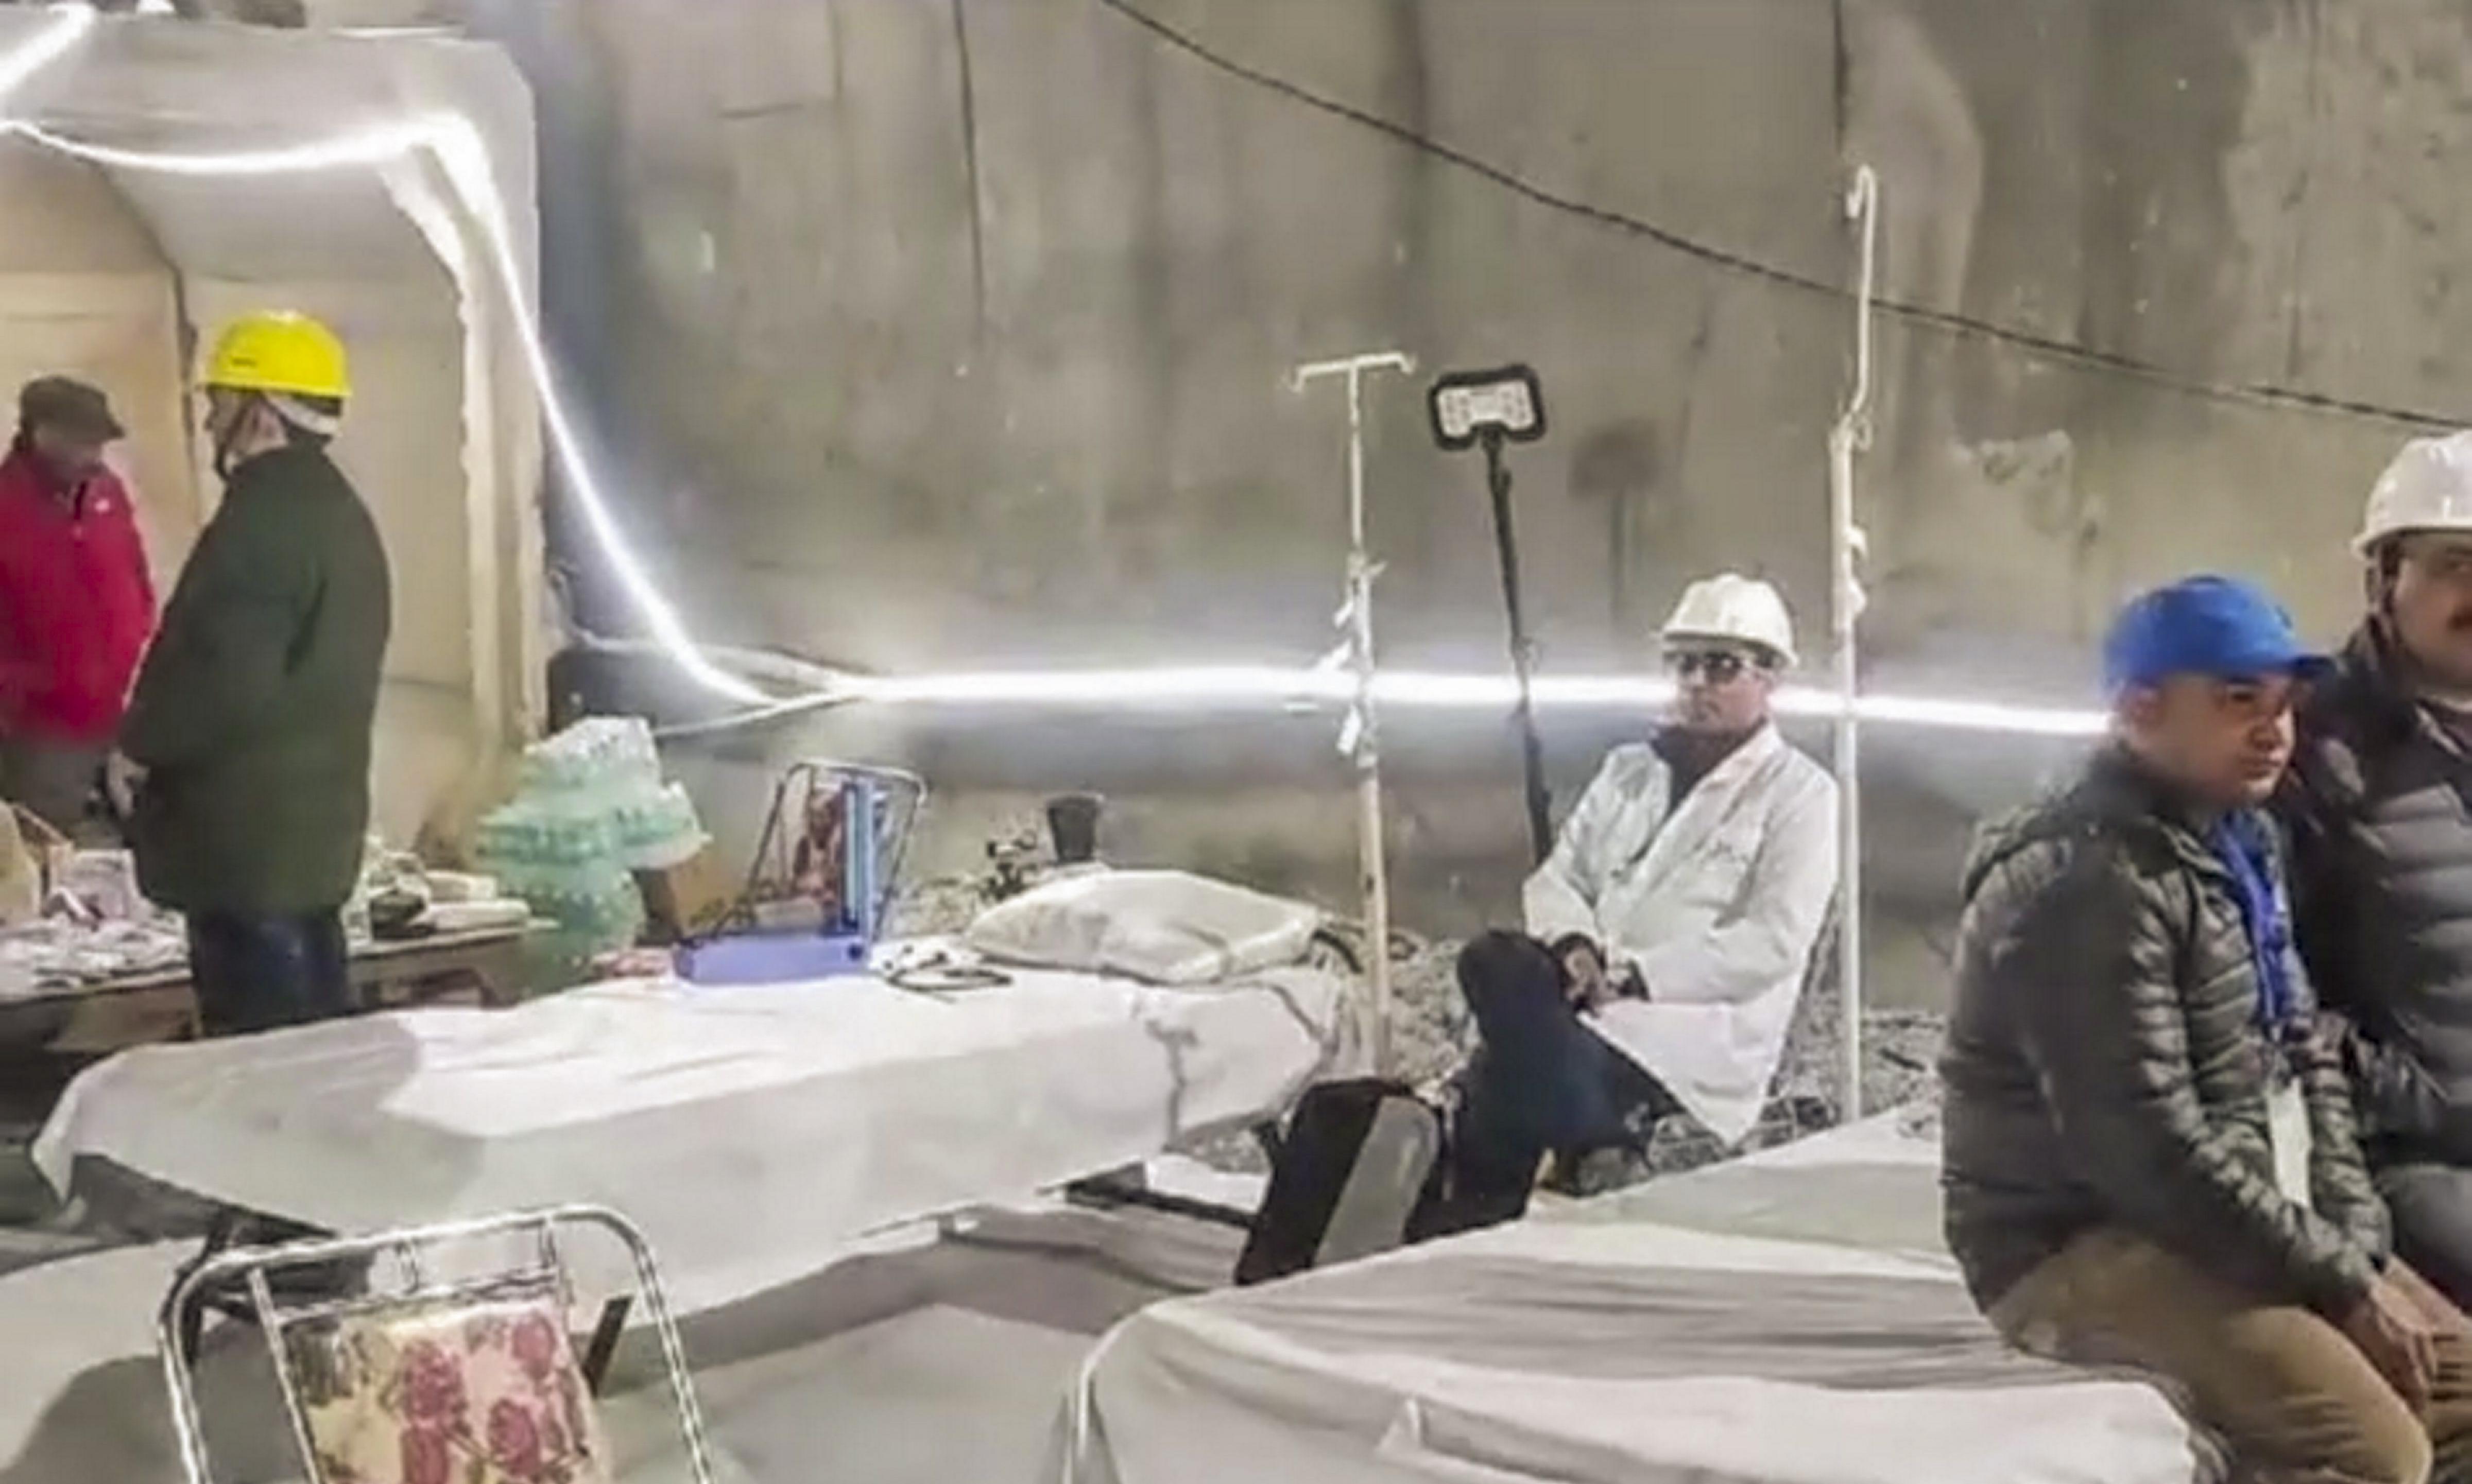 Medical staff with beds and other essentials on standby inside the Silkyara tunnel during the rescue operation of the 41 workers trapped inside the under-construction tunnel in Uttarakhand. | Photo: PTI